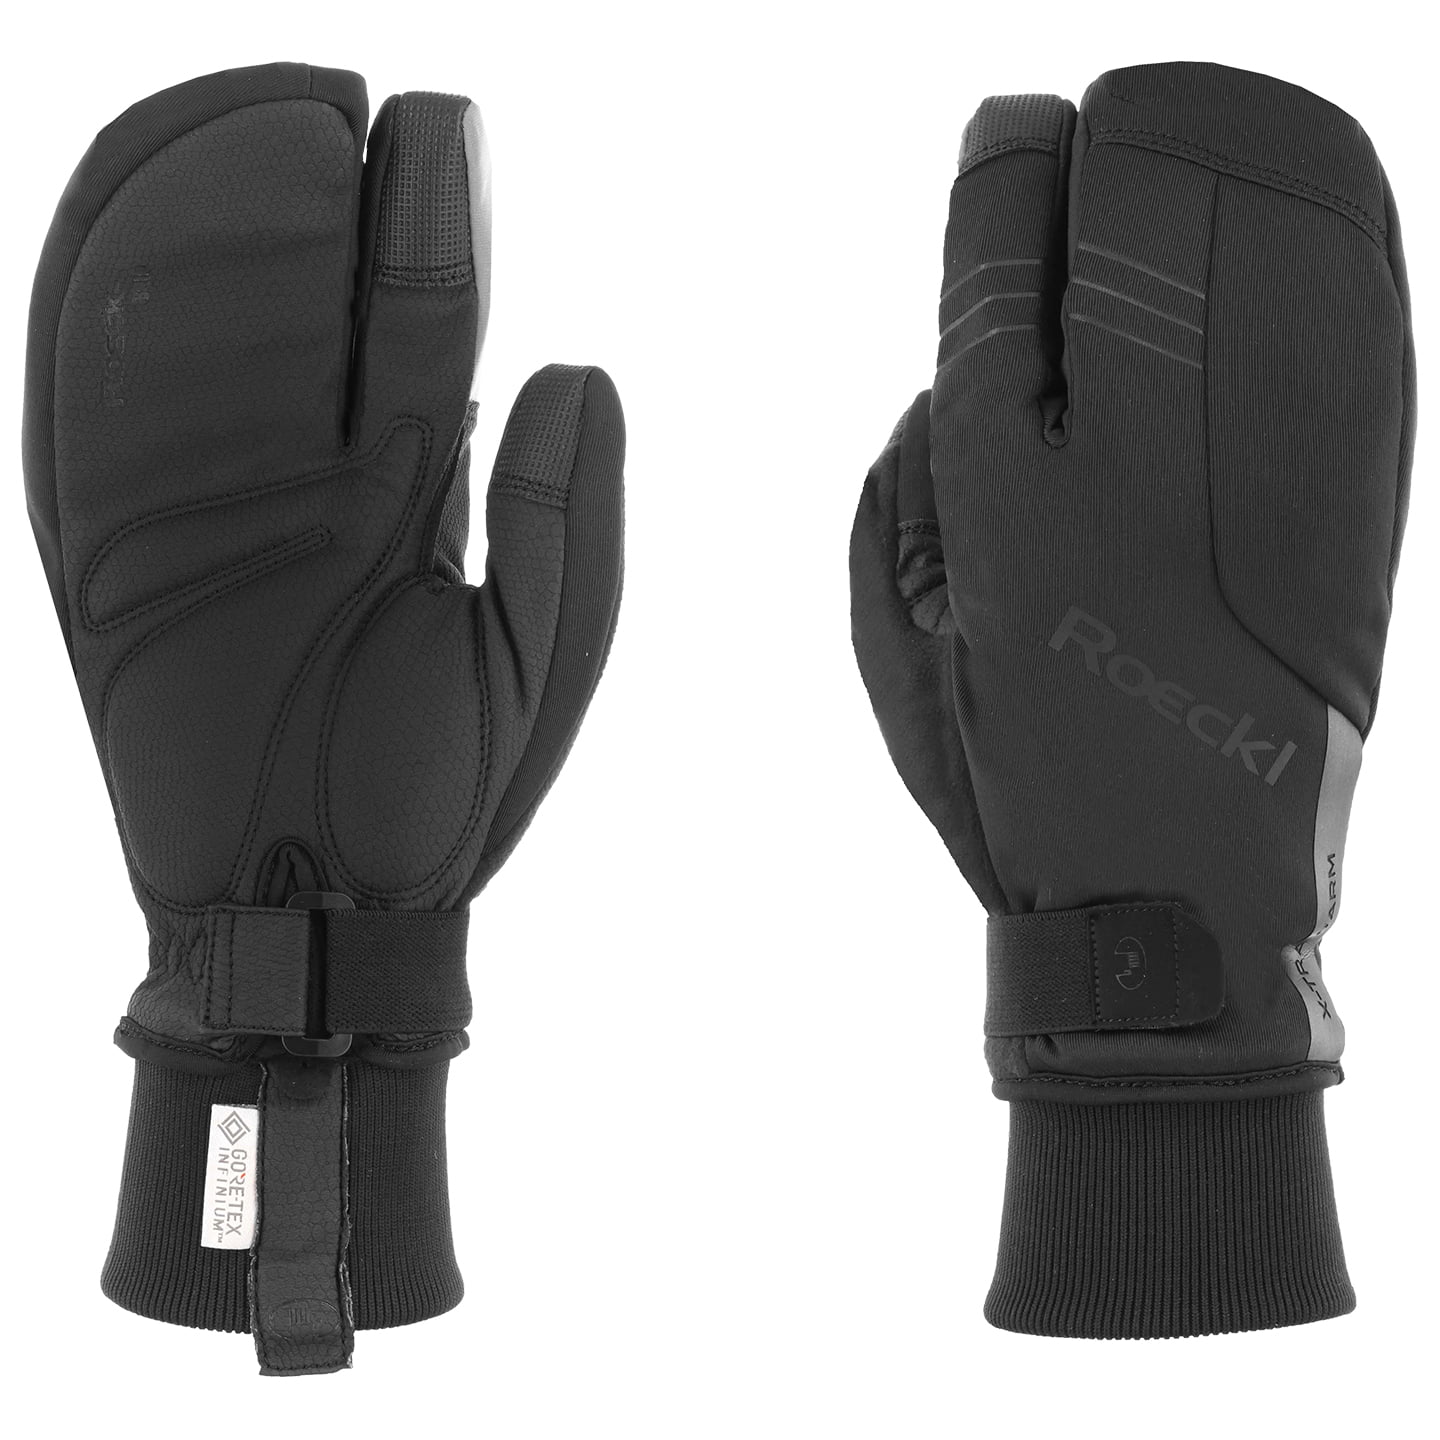 ROECKL Villach 2 Trigger Winter Gloves Winter Cycling Gloves, for men, size 7,5, MTB gloves, MTB clothing